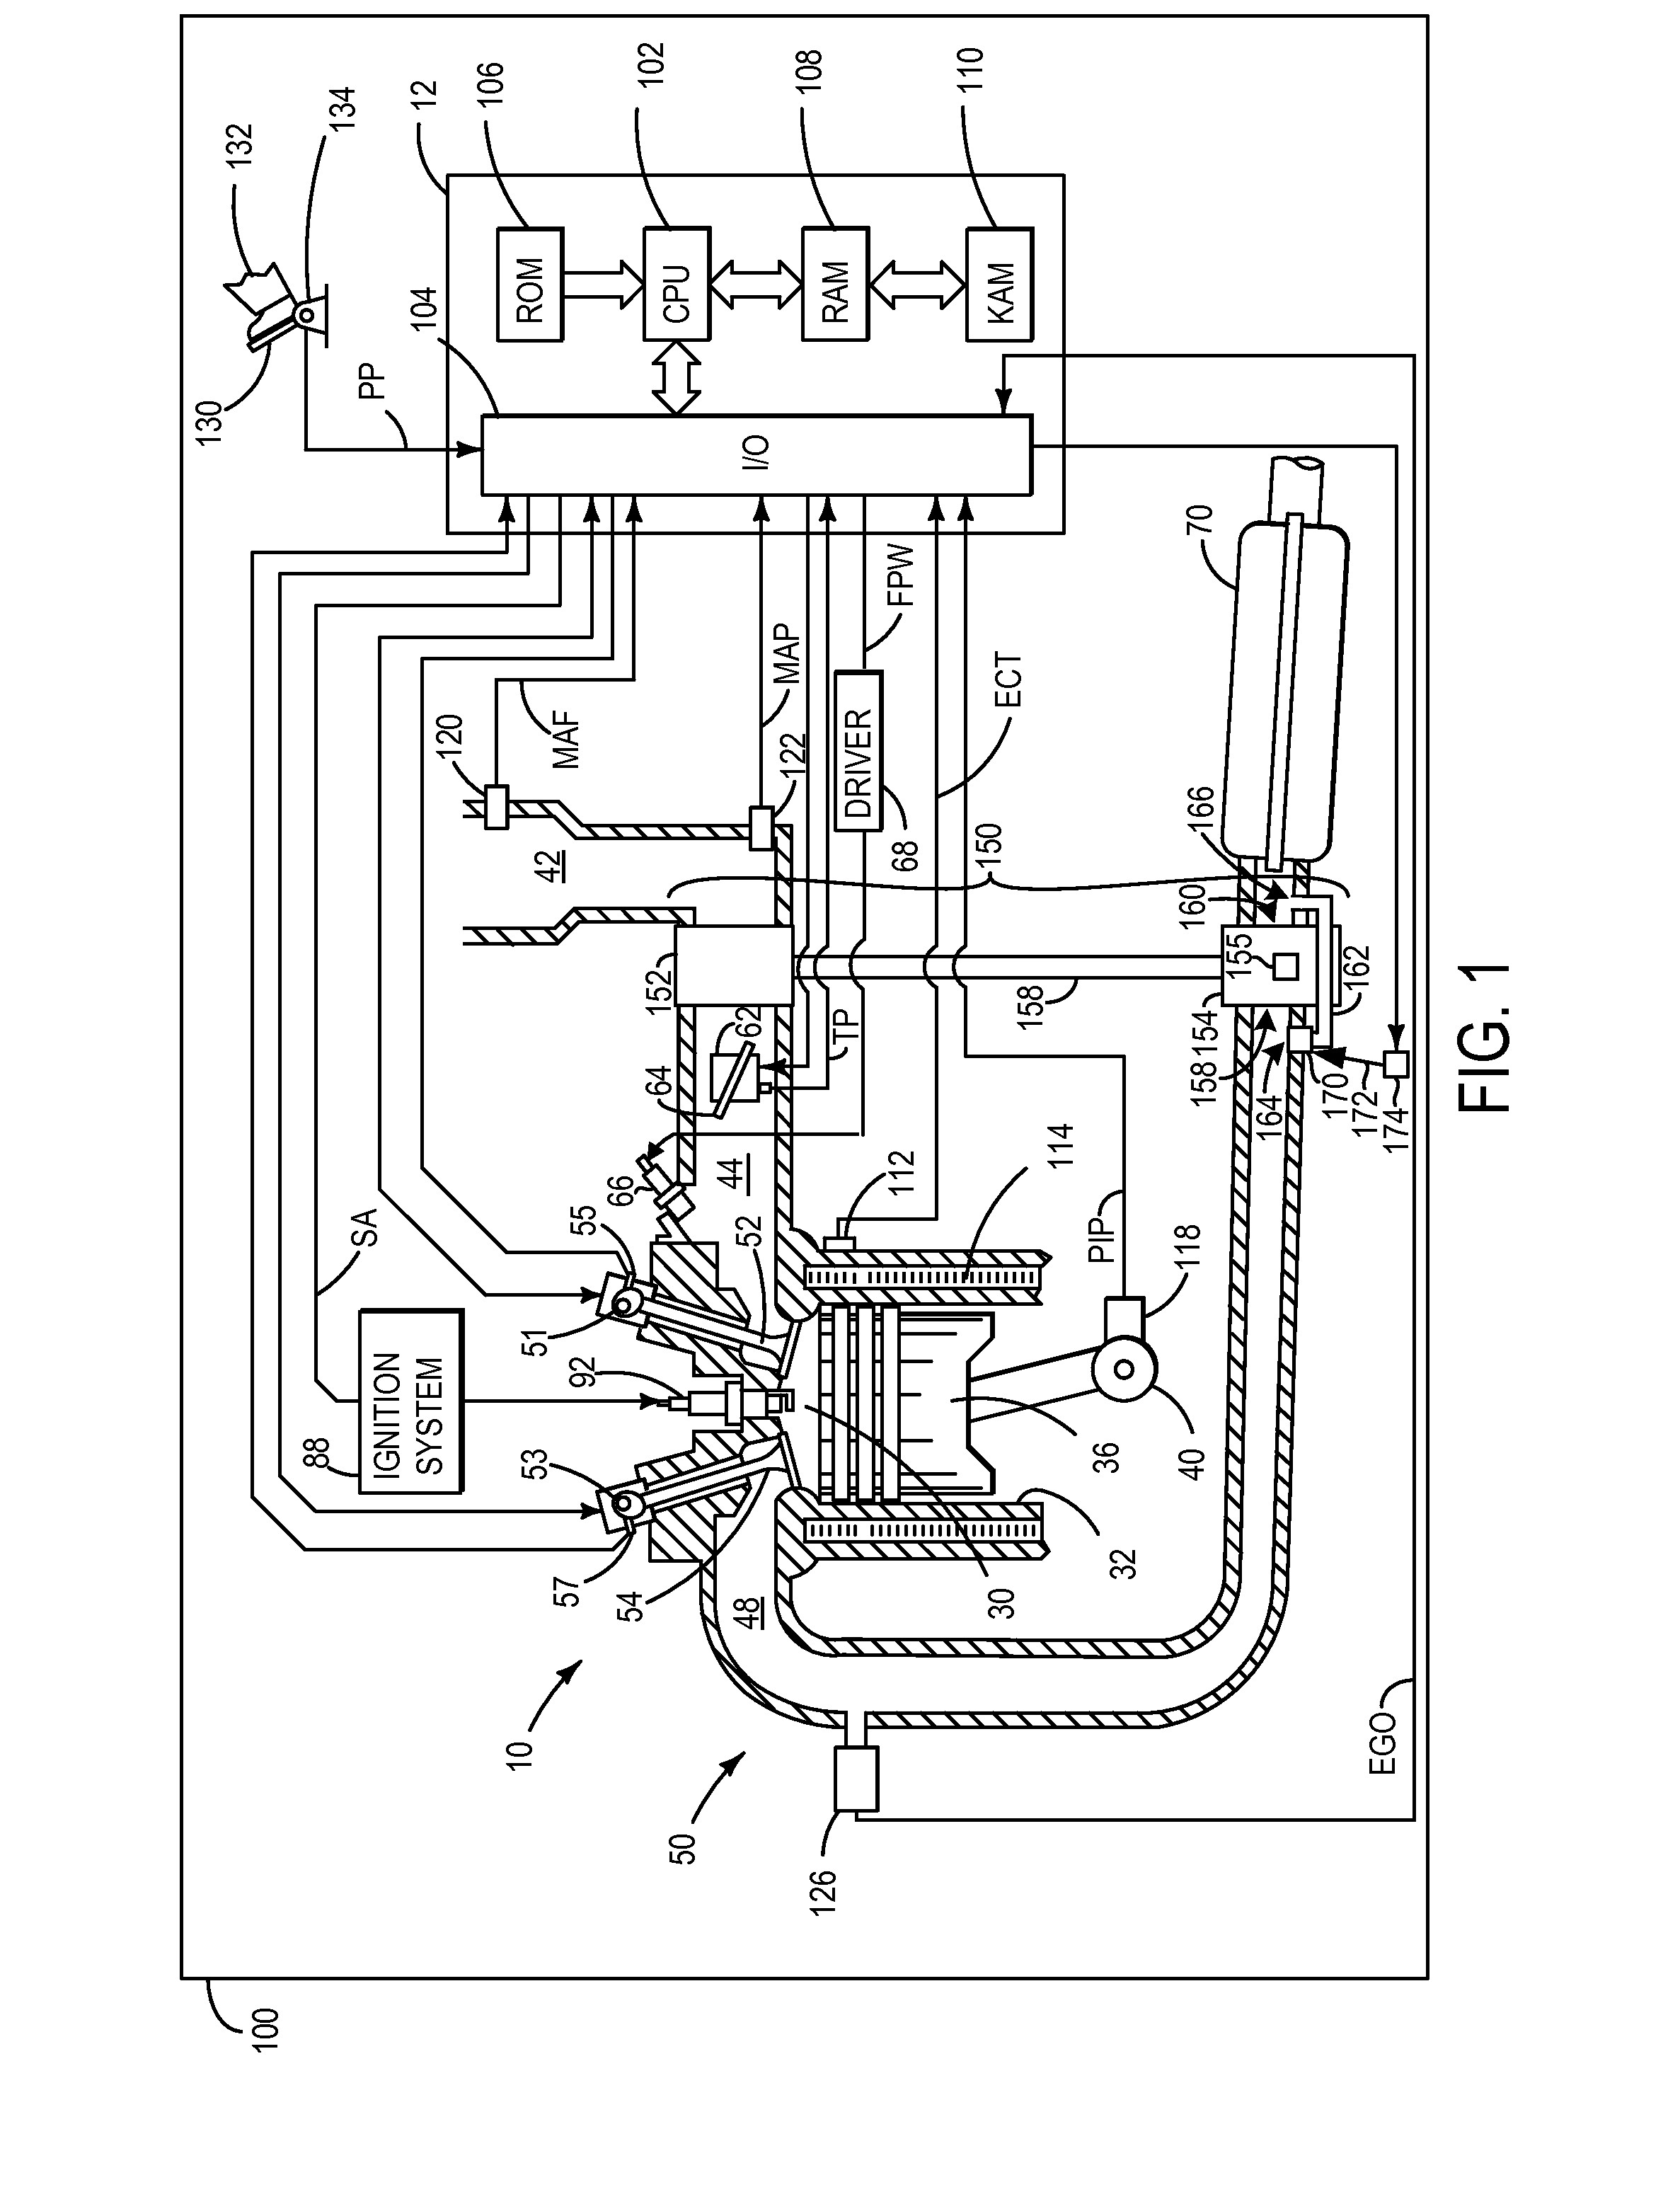 Turbo Charger Diagram Nice Turbocharger Wastegate Diagram Pattern Electrical Diagram Of Turbo Charger Diagram